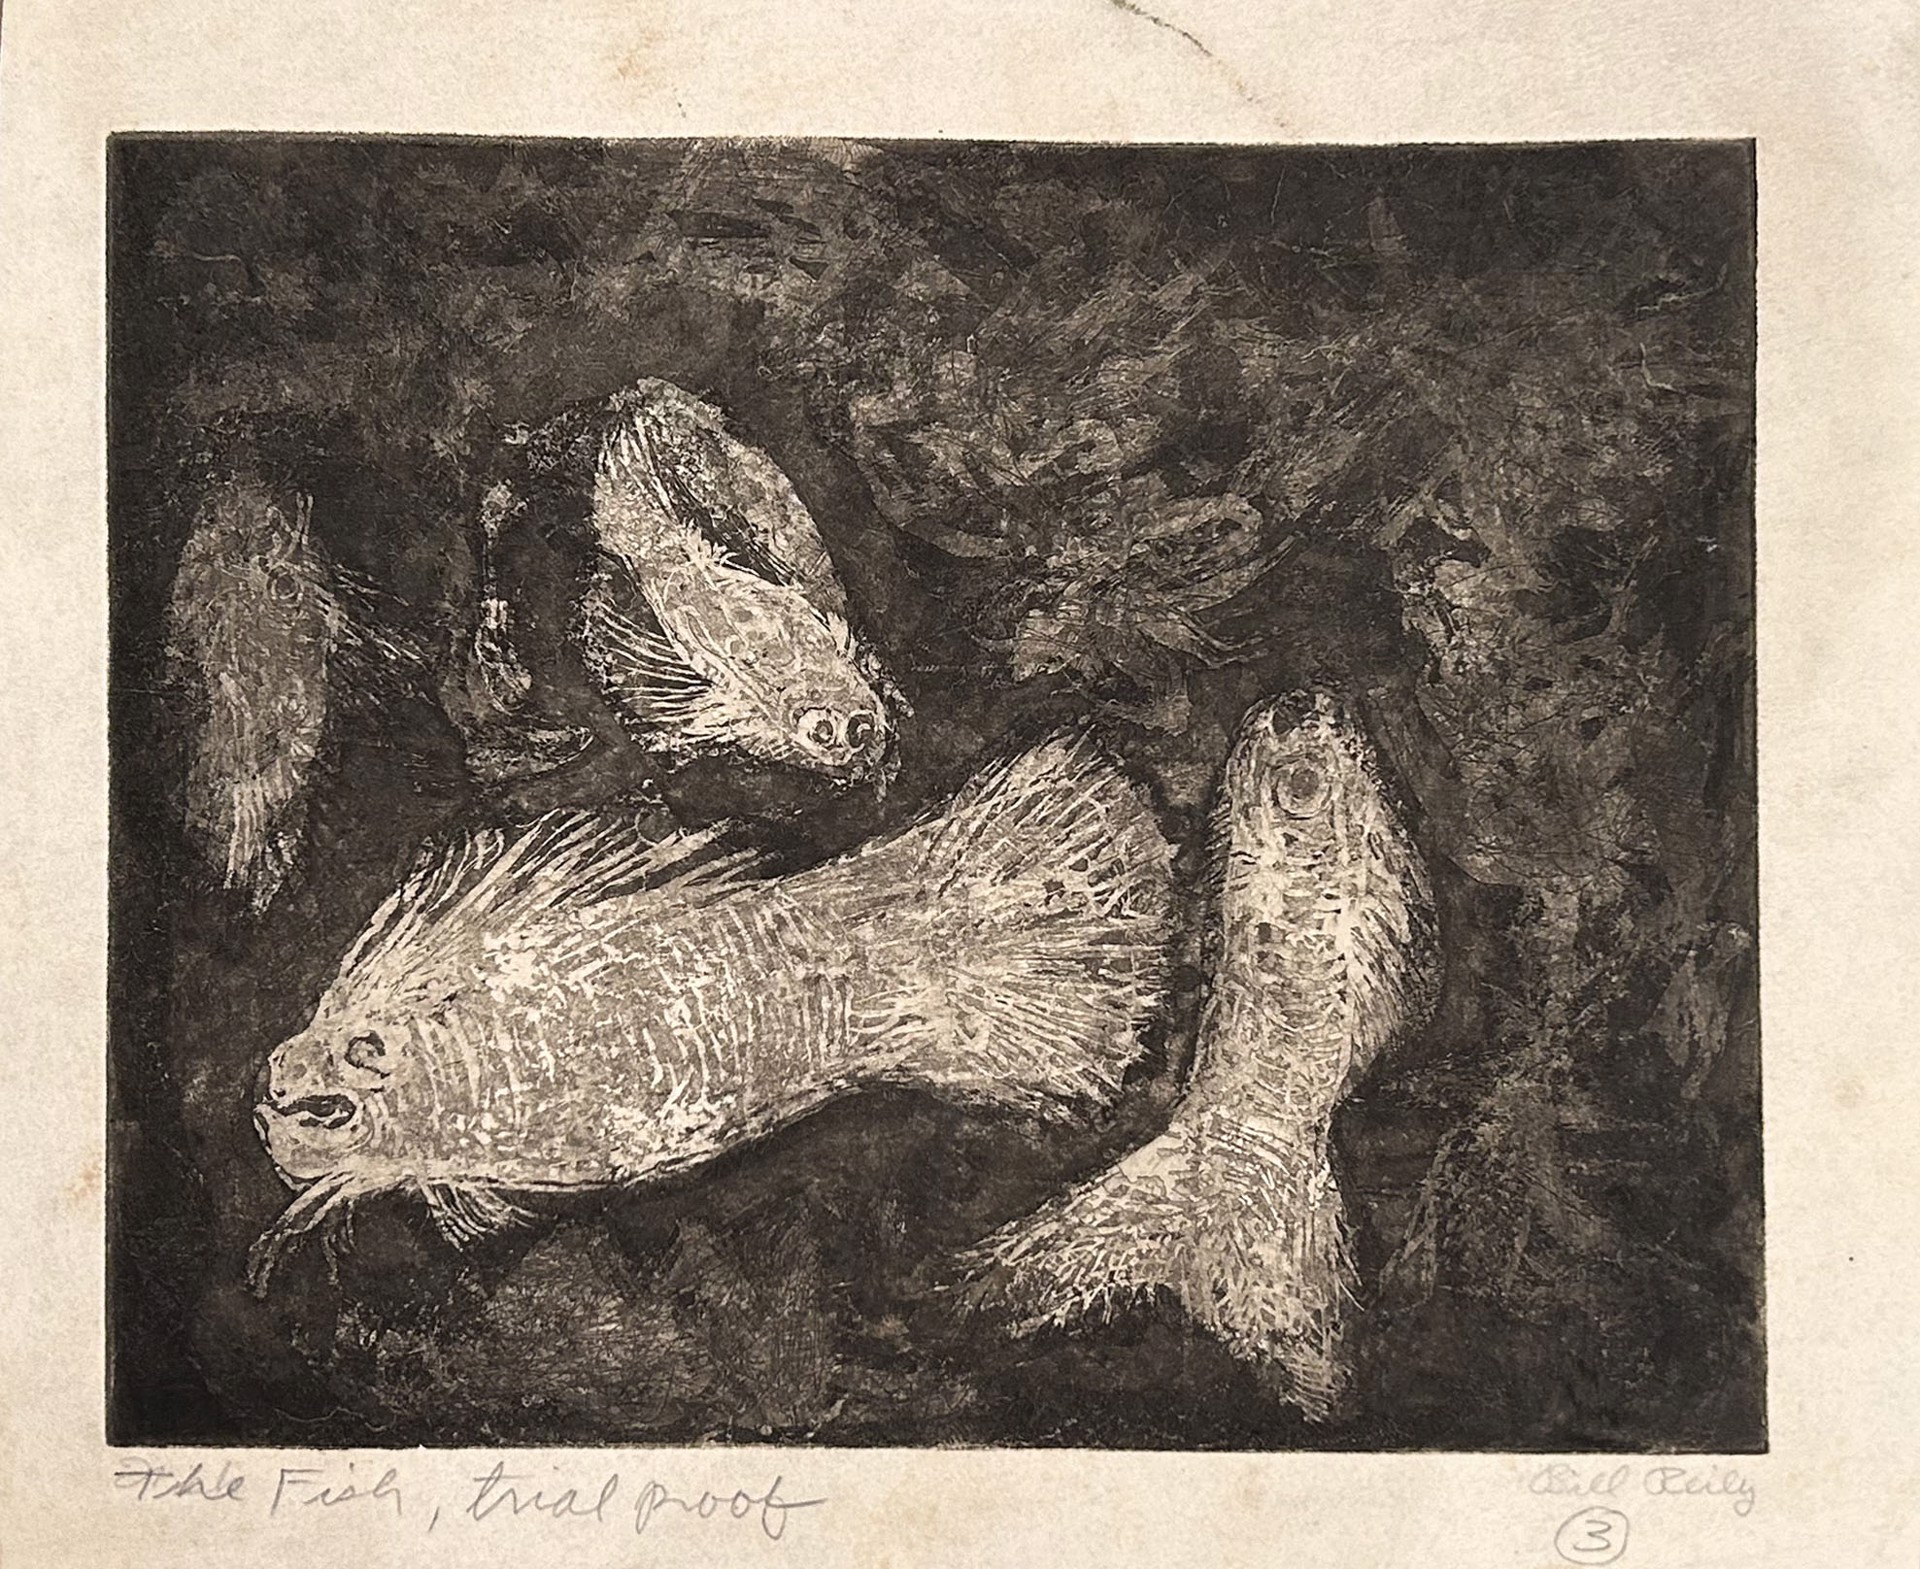 3a. The Fish (trial proof) by Bill Reily - Prints